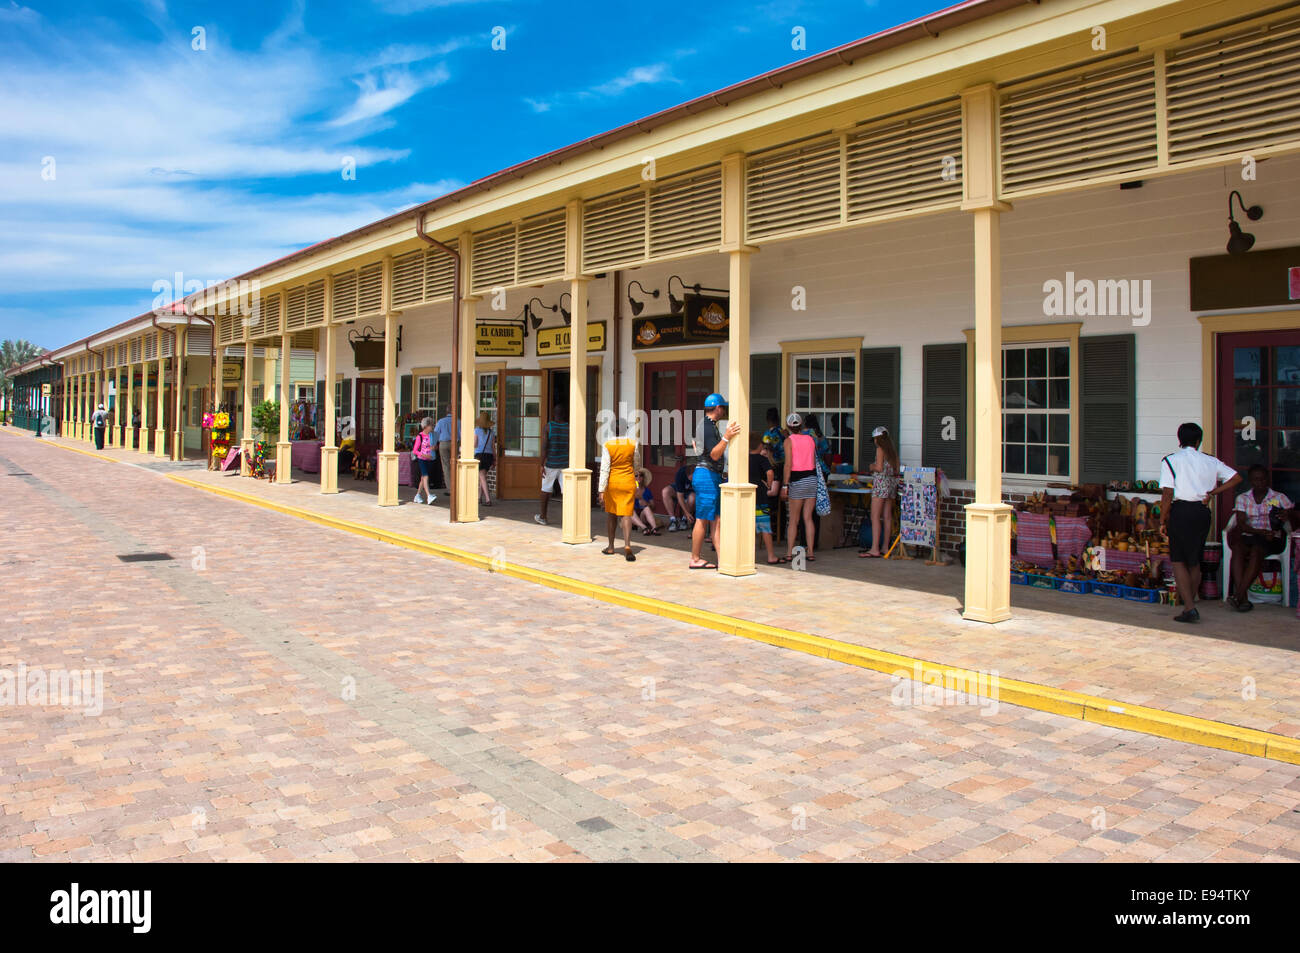 Shopping district in Falmouth, Jamaica Stock Photo